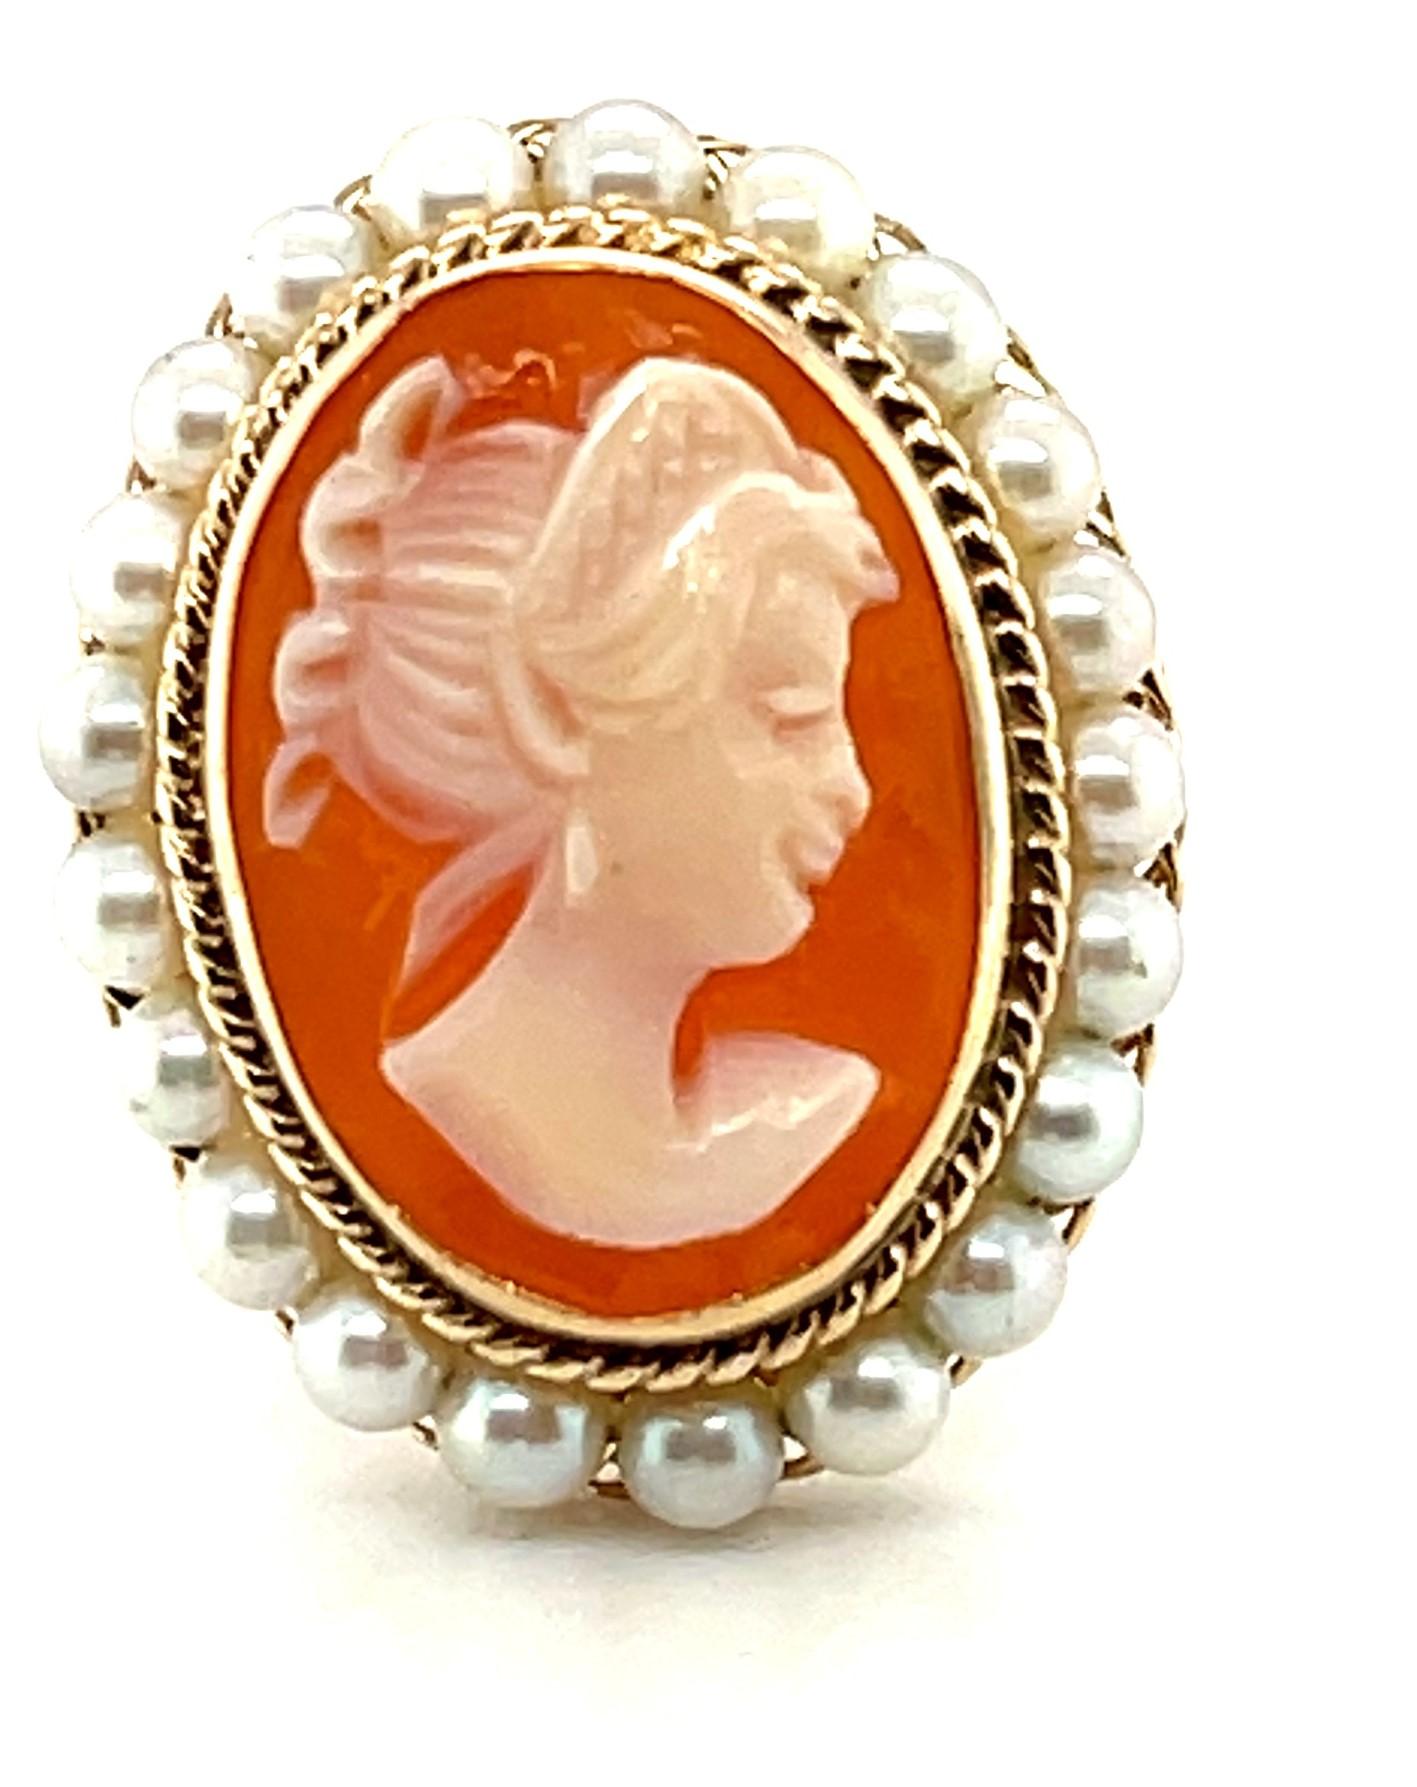 This pretty ring features a lovely shell cameo that was beautifully hand carved in Italy. The cameo is bezel set and encircled by 3mm seed pearls that have been hand-strung on fine gold wire. The pearls sit atop an intricate frame of hand-spun fine